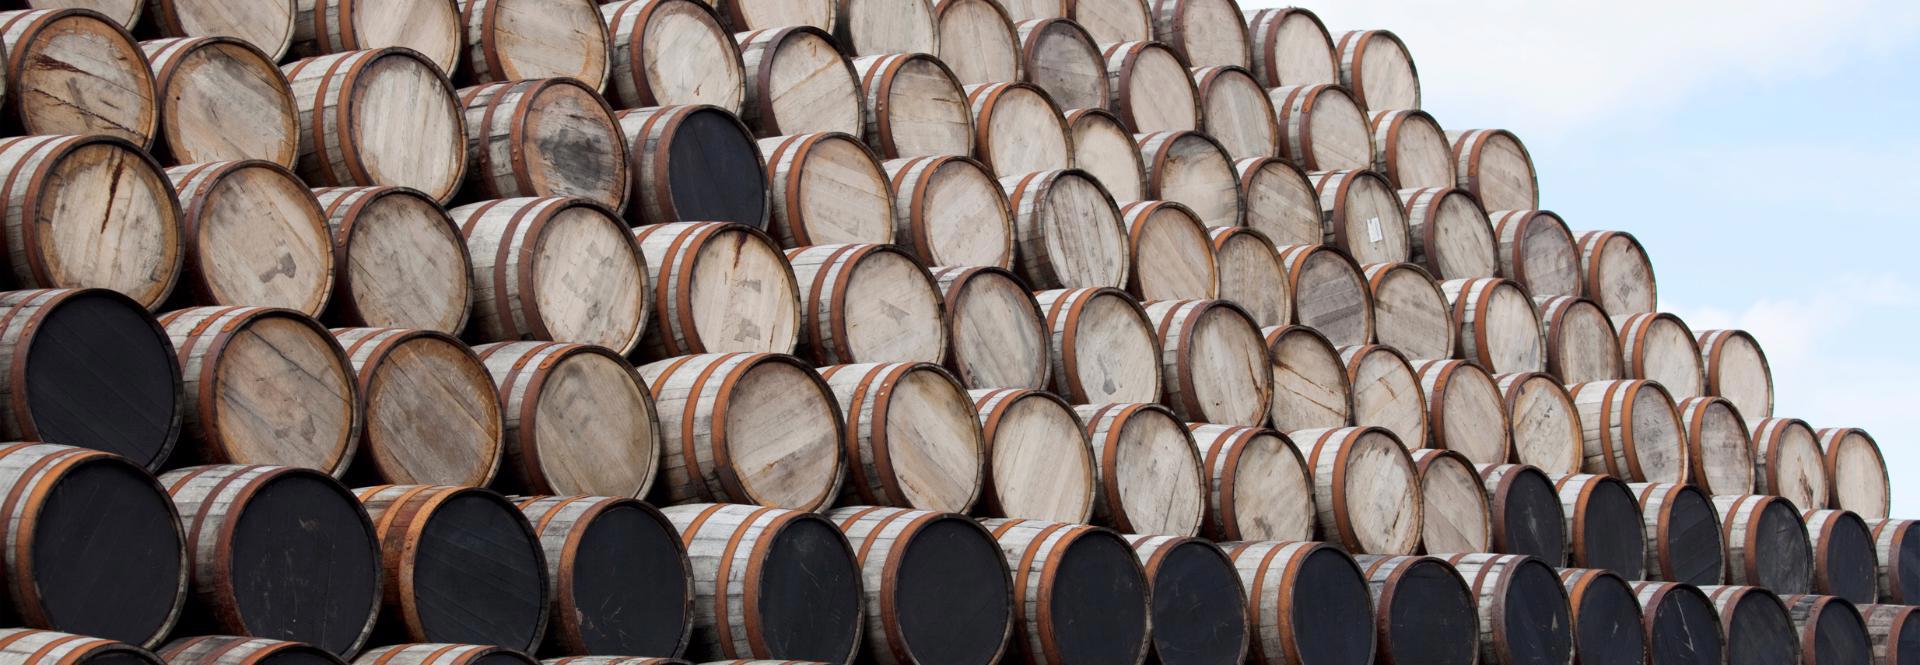 Whisky Cask For Sale - Whisky Investment